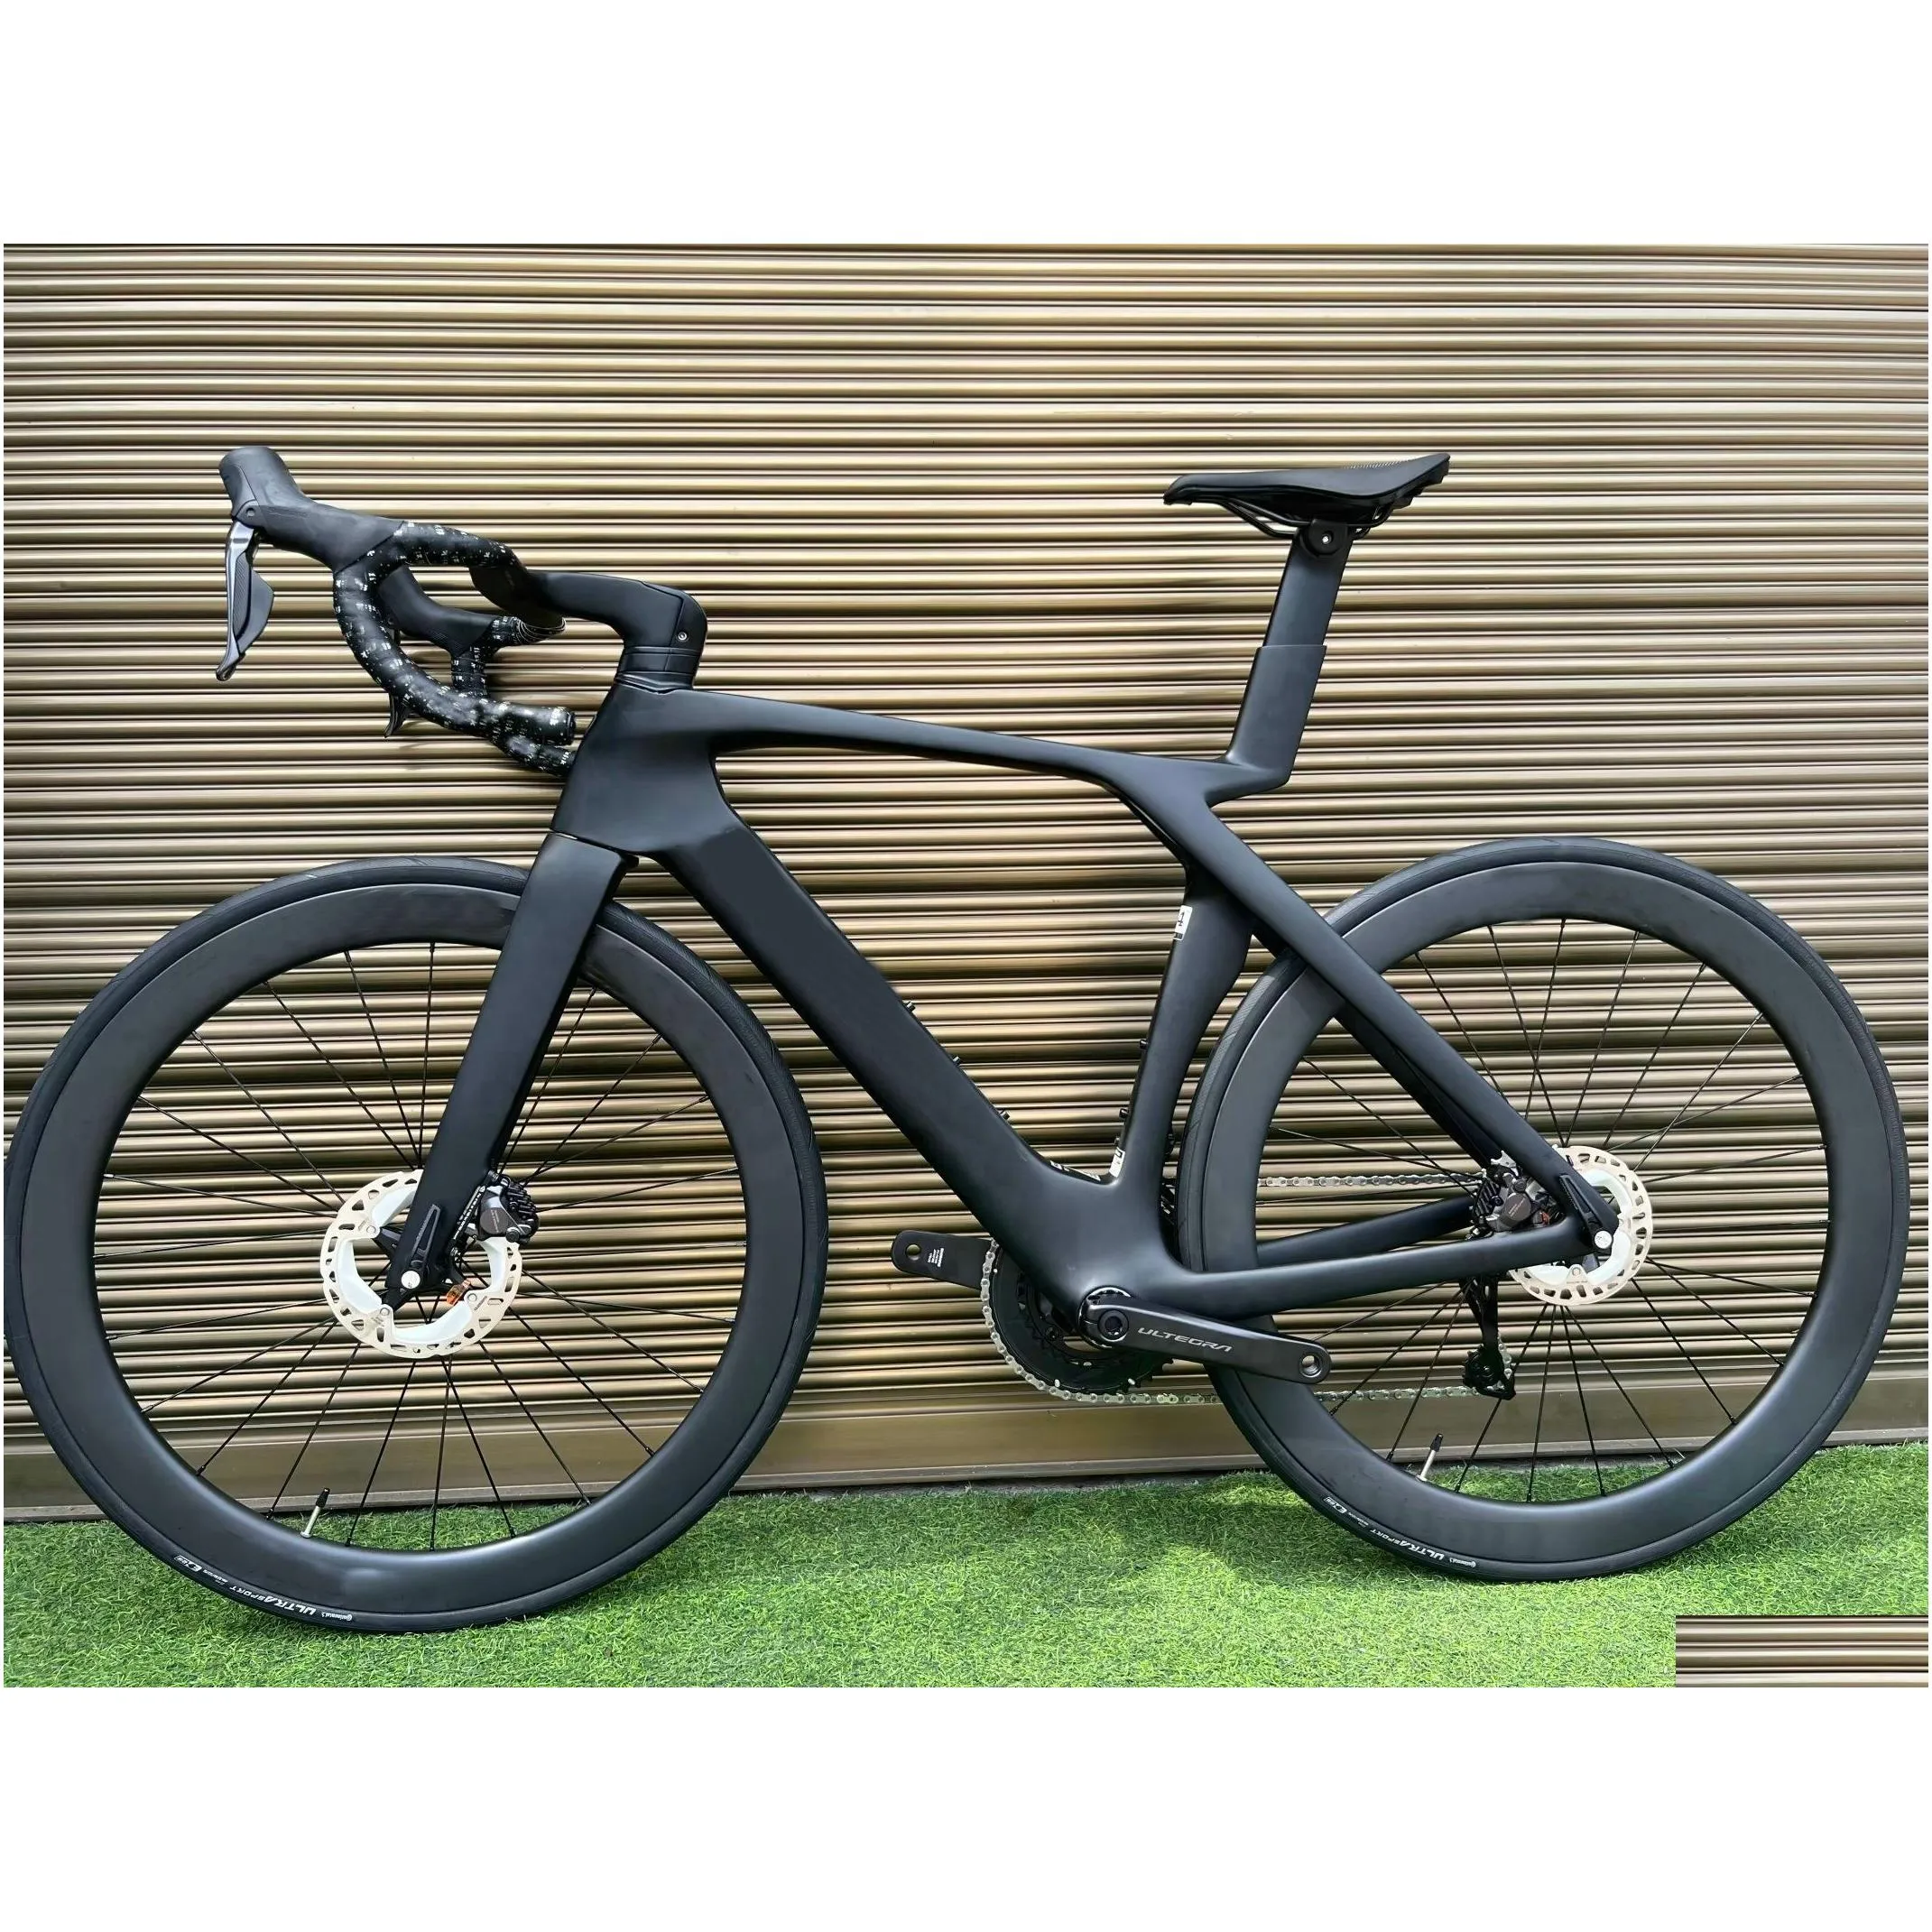 DIY SLR 9 Carbon Road Full Bike Glossy with R7170 di2 Groupset, 50mm Carbon Wheelset